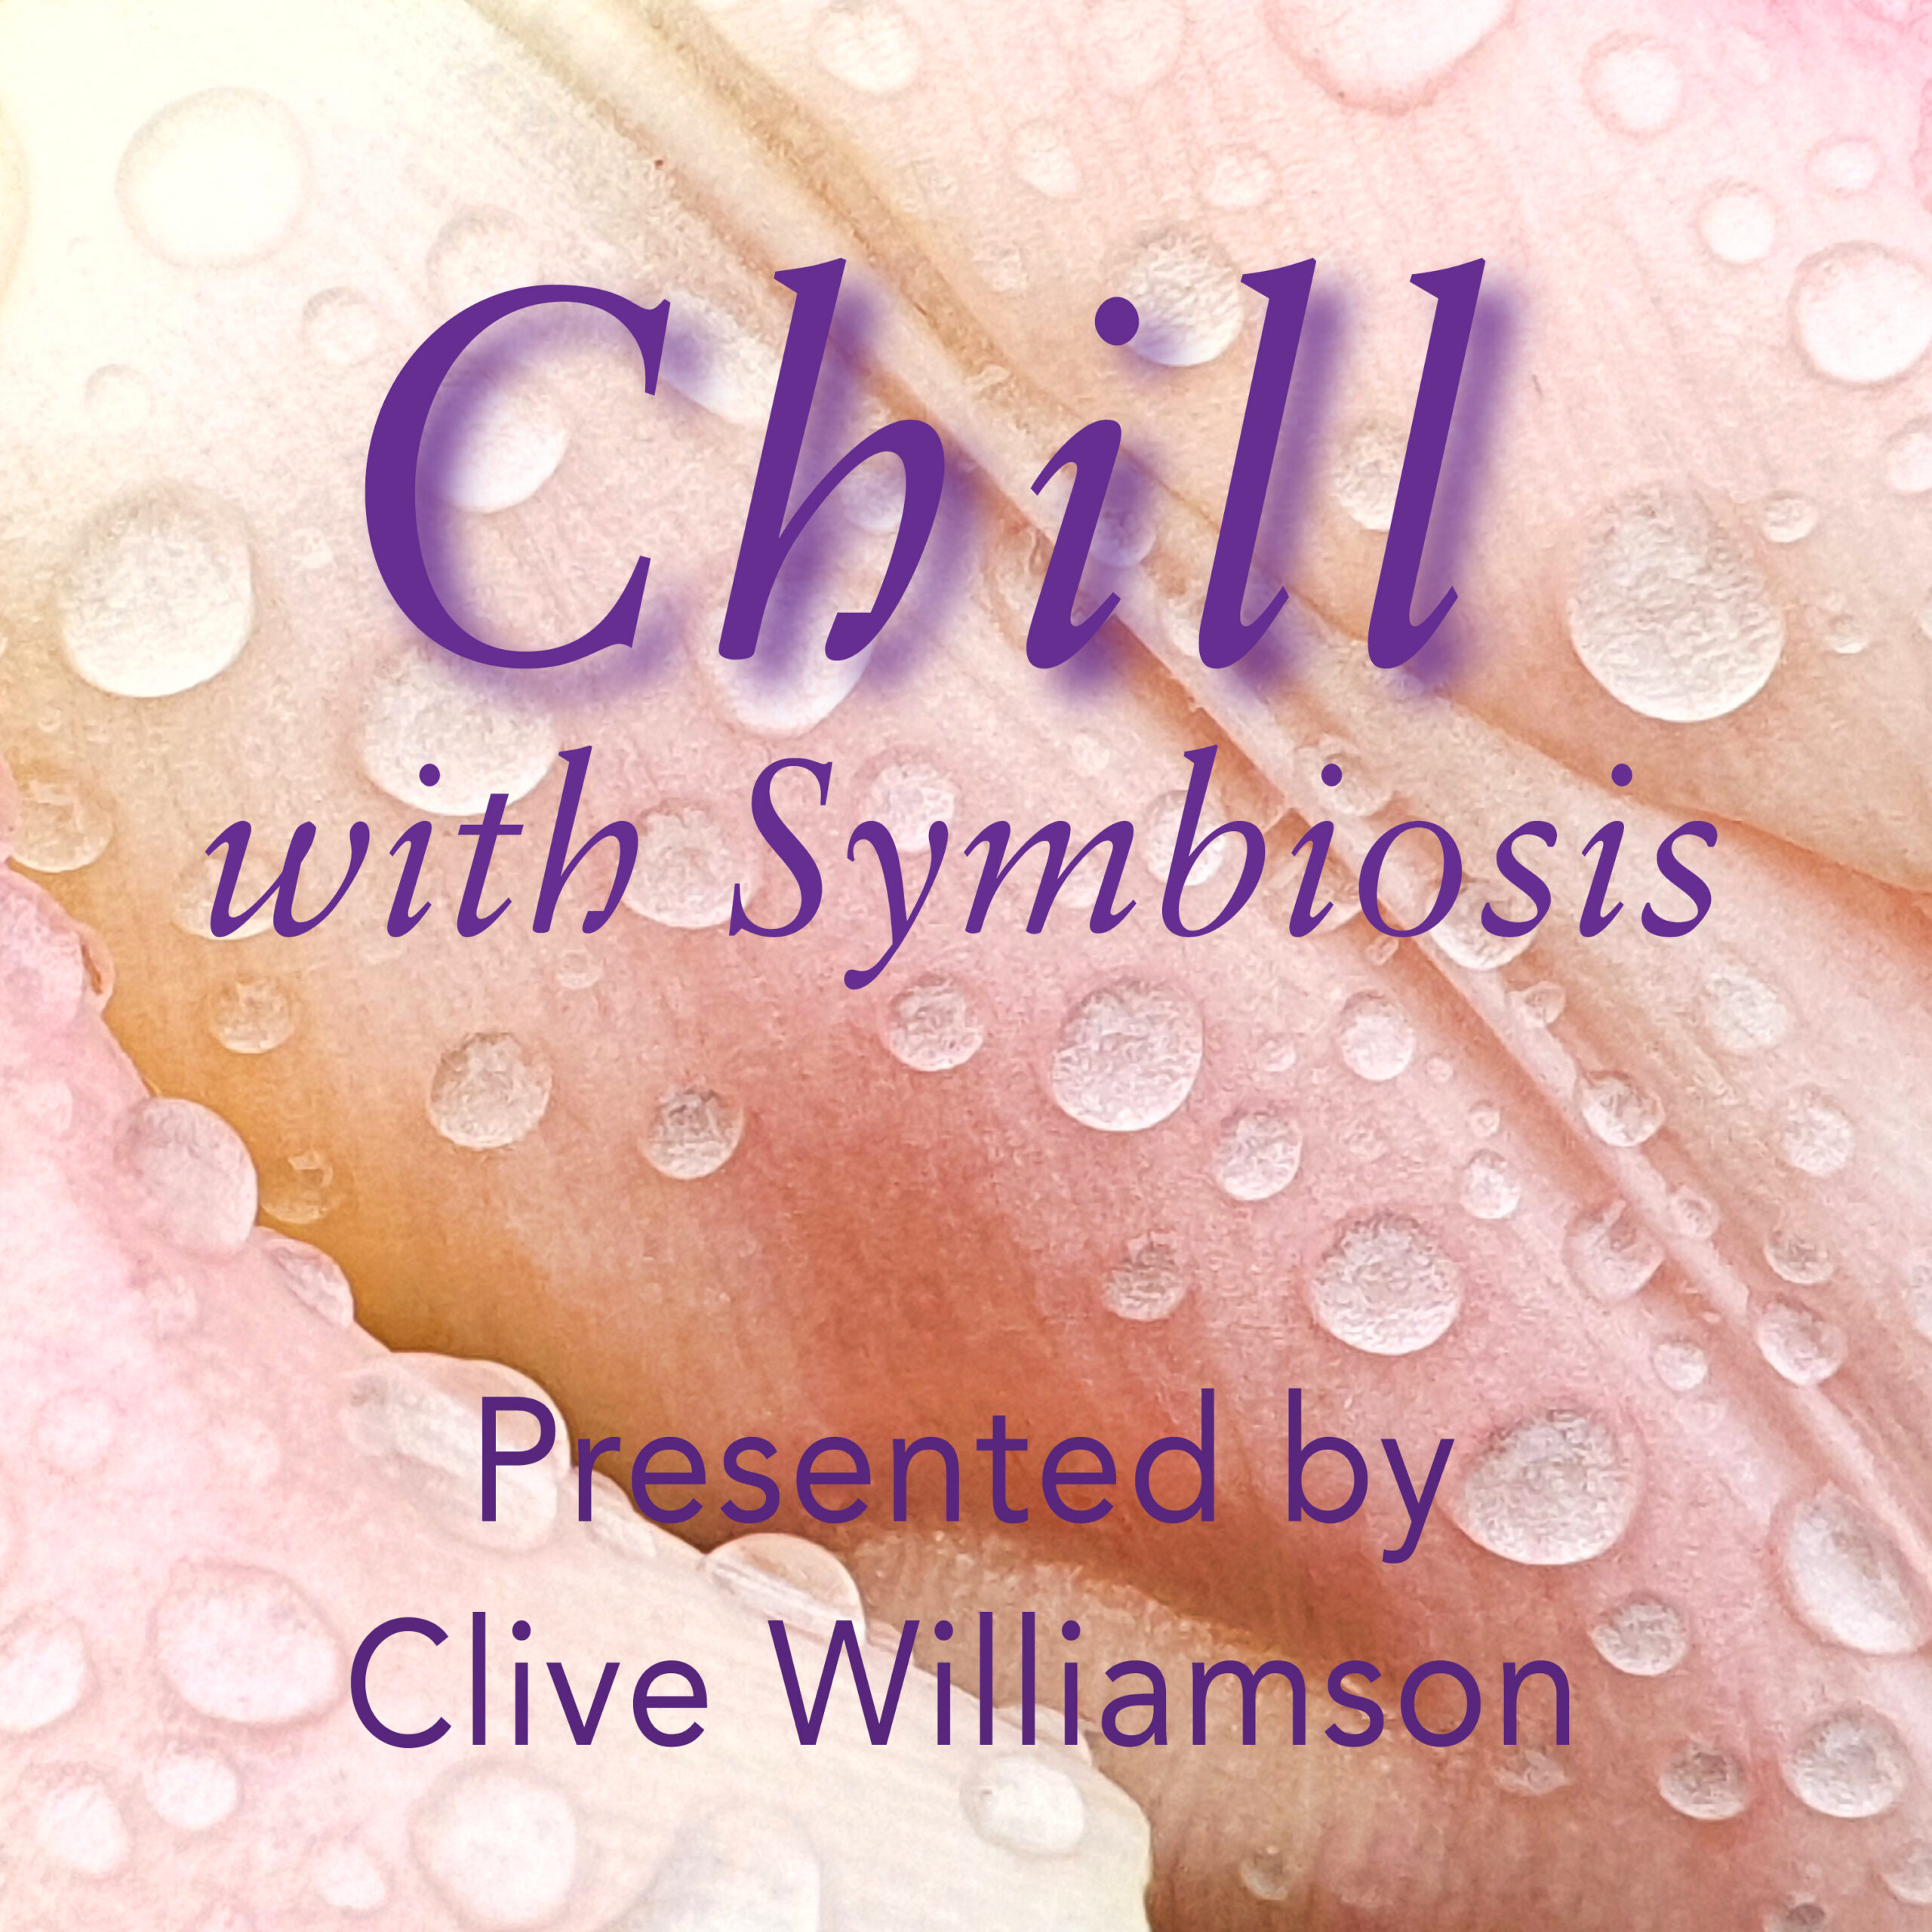 Chill with Symbiosis